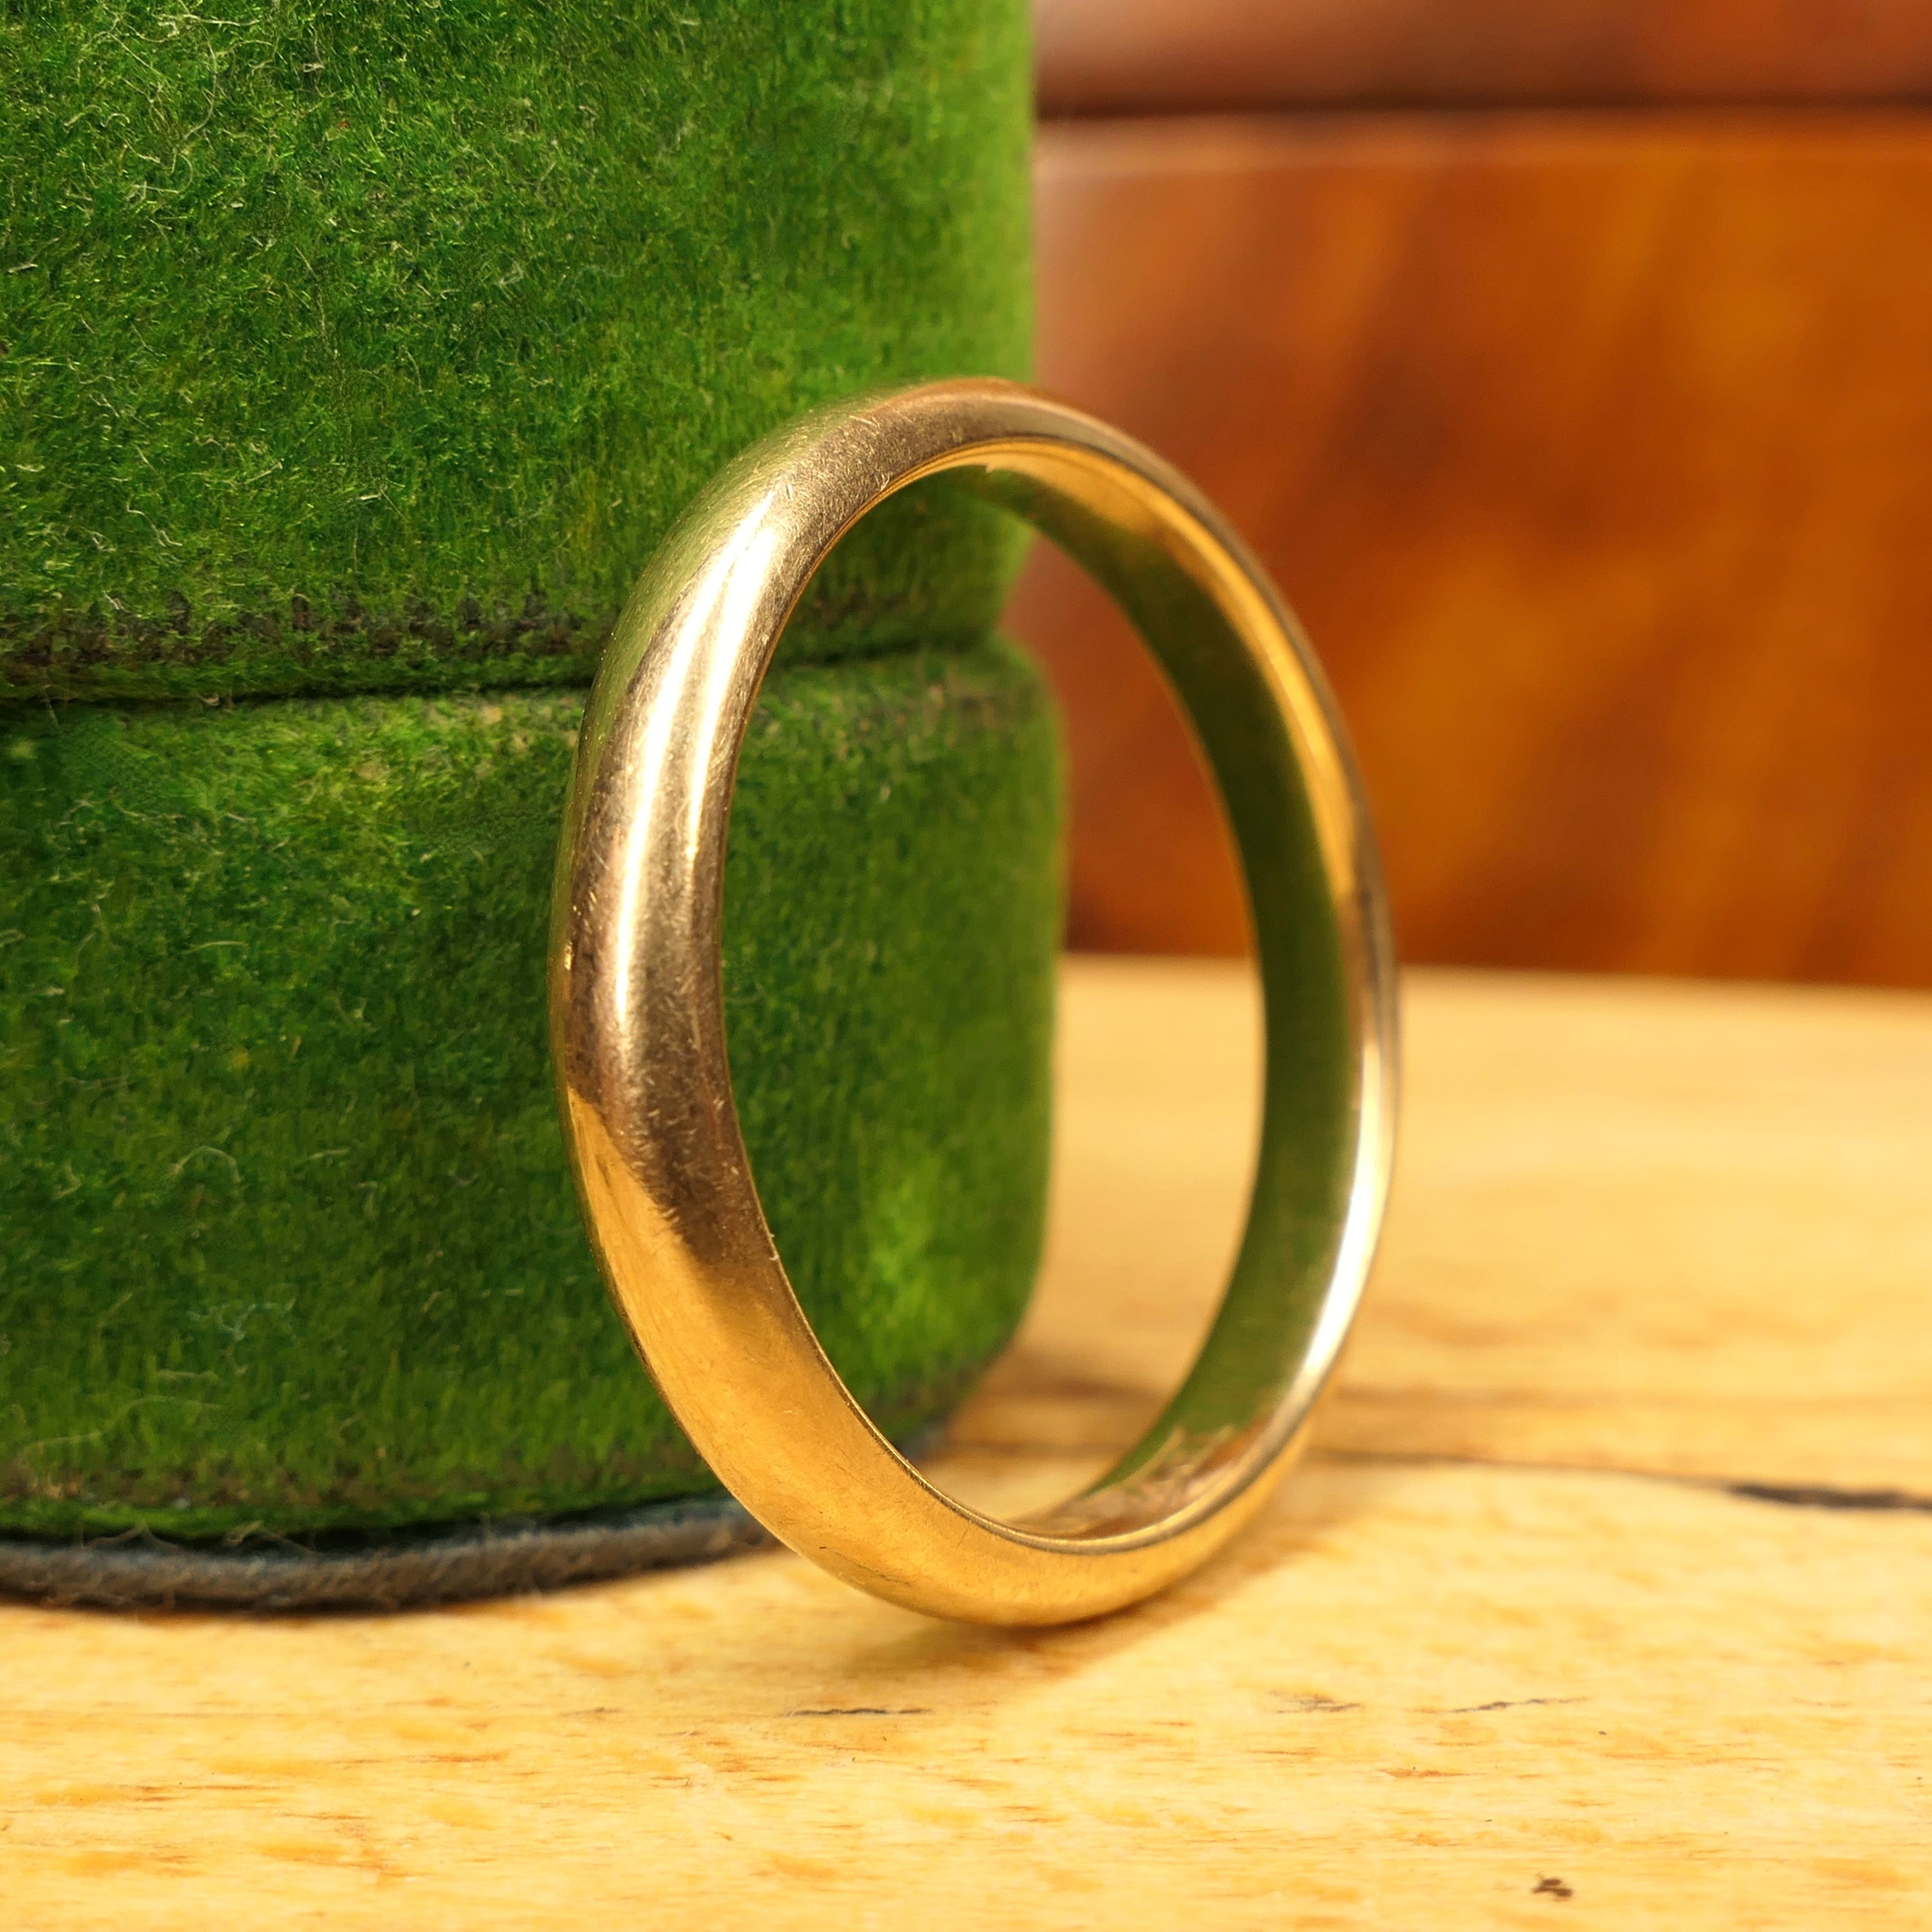 Vintage, 1940s, 9ct Gold, Utility wedding band ring, hallmarked in 1946